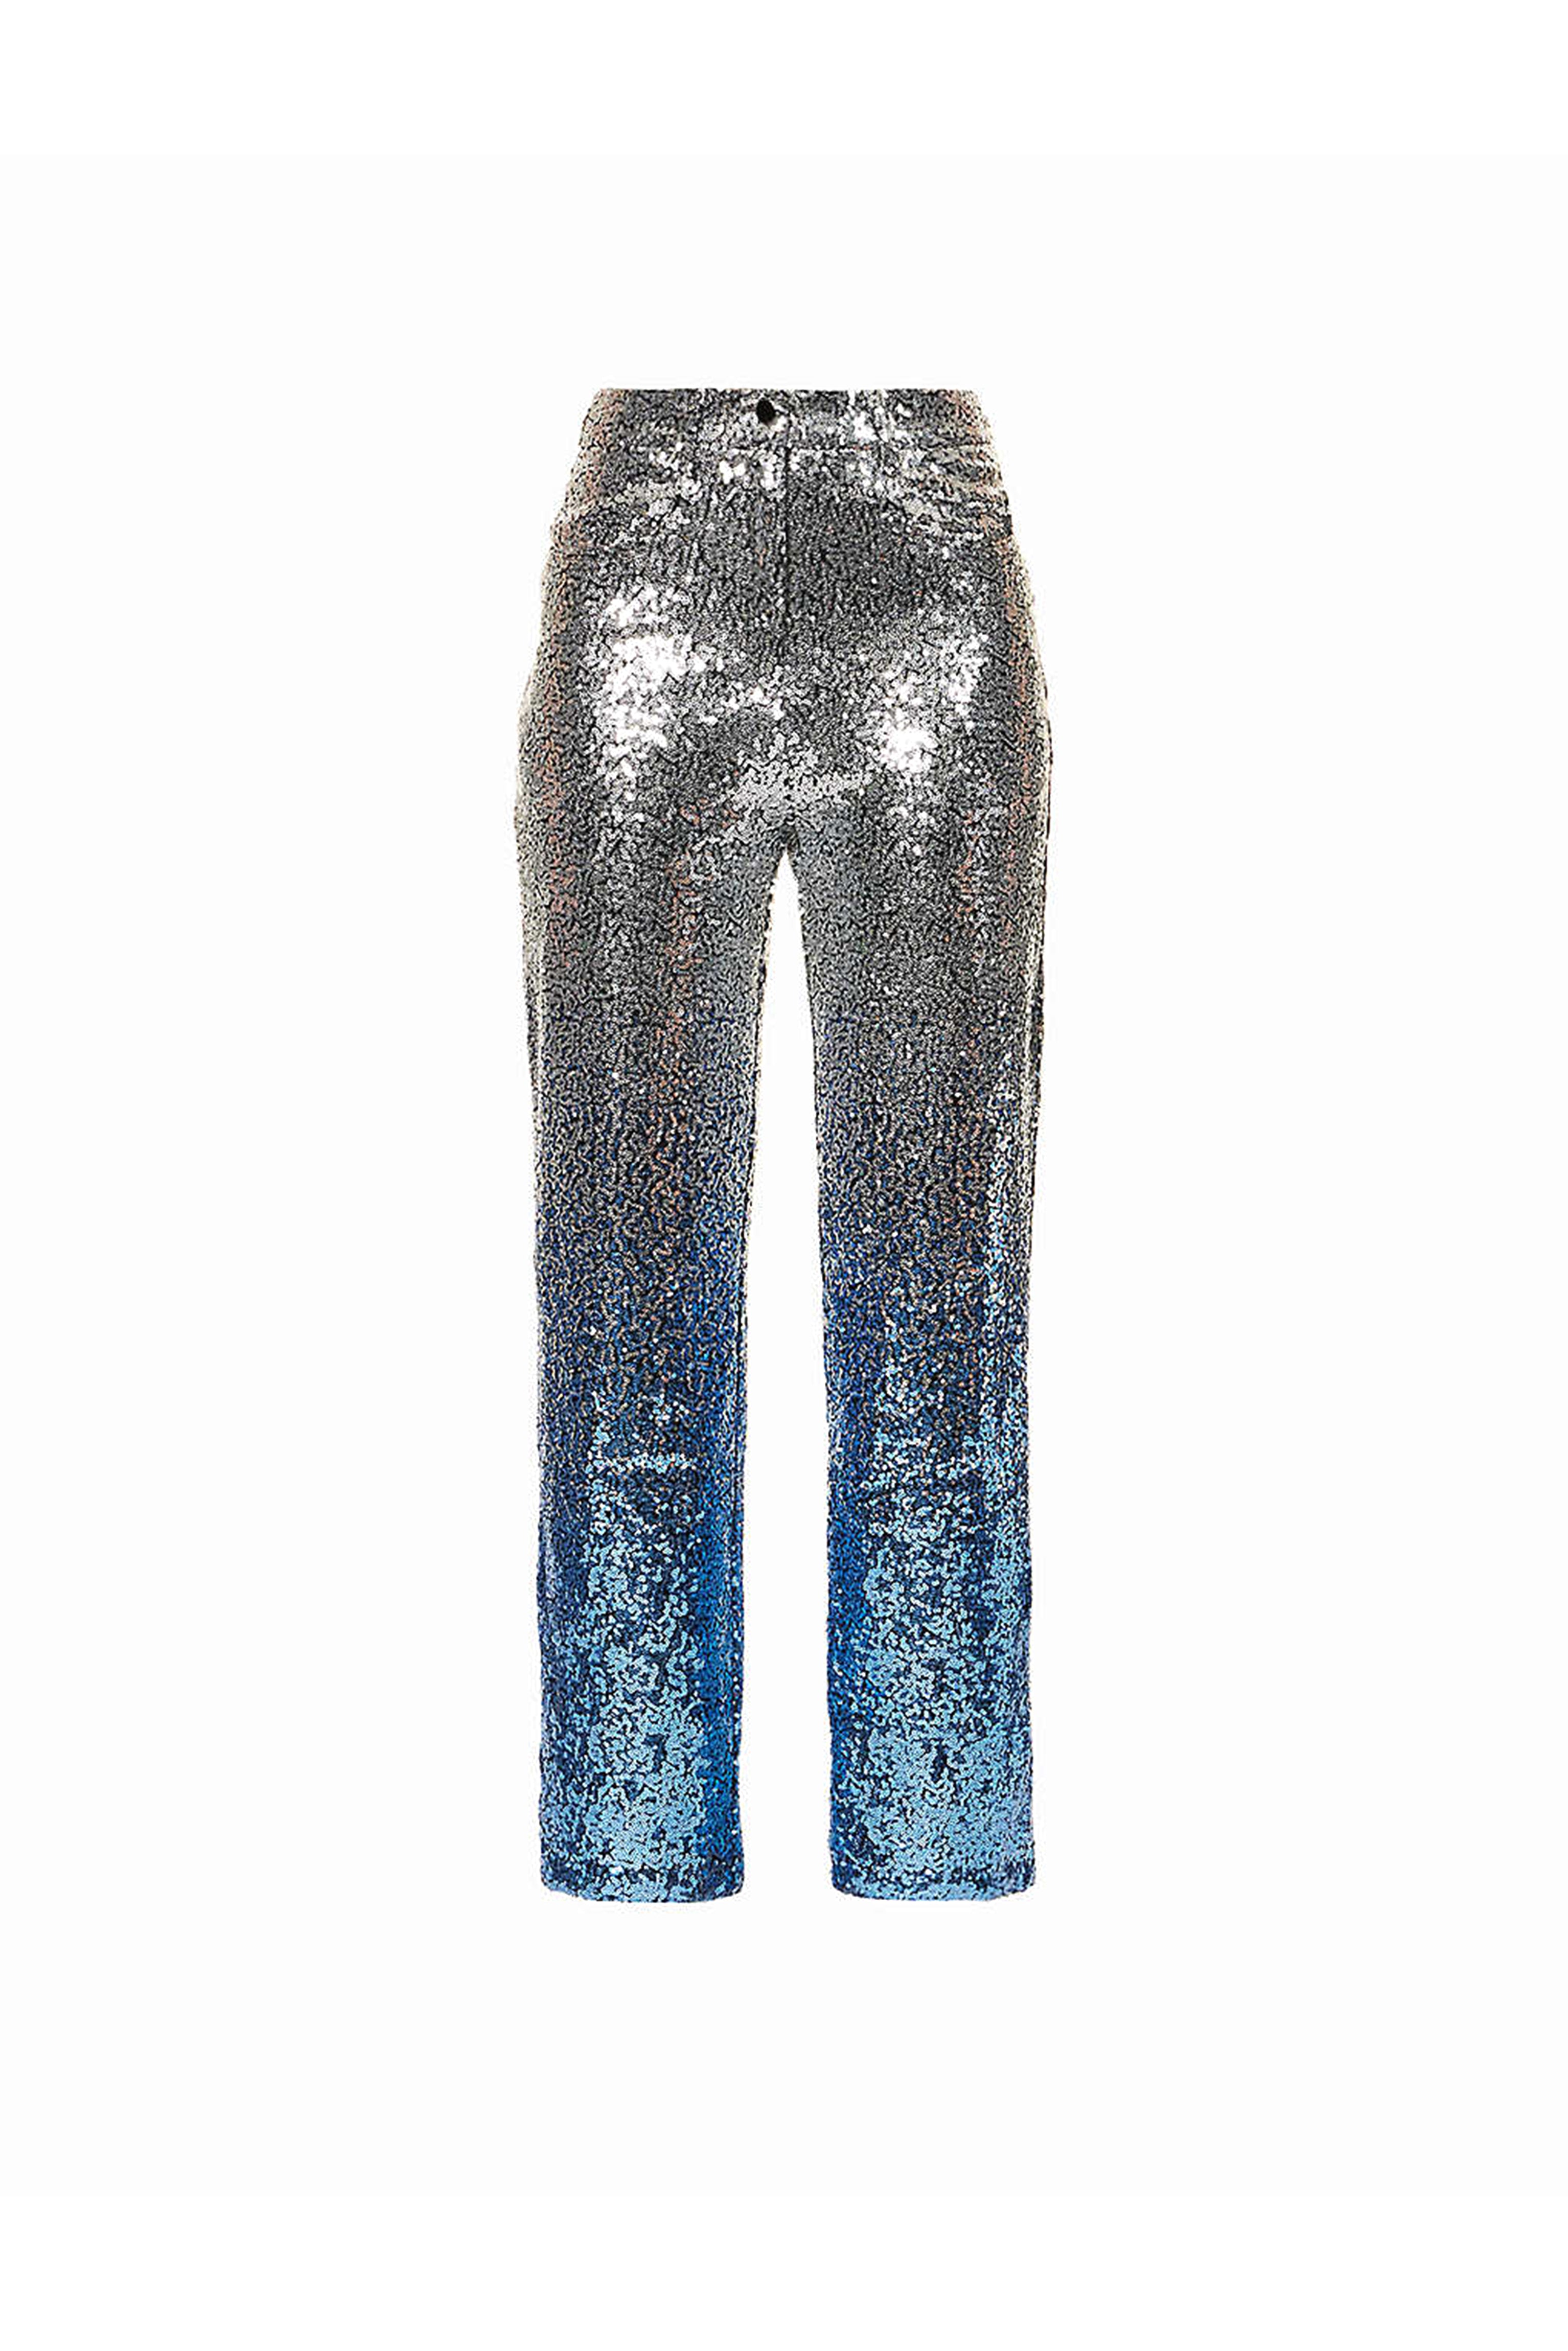 Dua Ombre High Waisted Party Sparkly Sequin Wide Leg Trousers